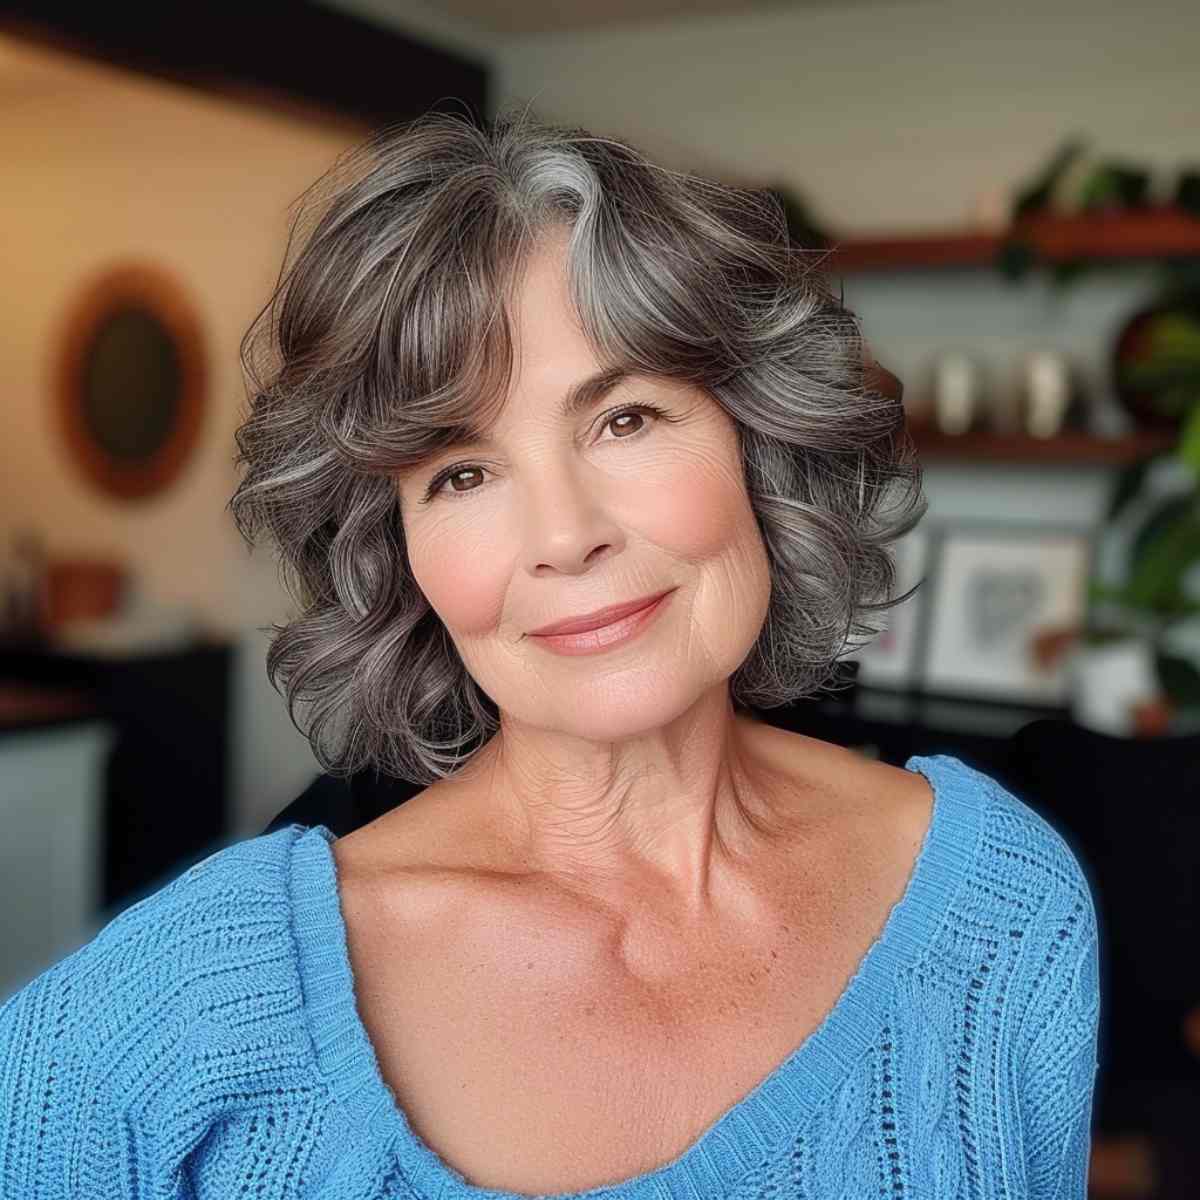 Face-Framing Curtain Bangs for Women Over 60 with short wavy hair